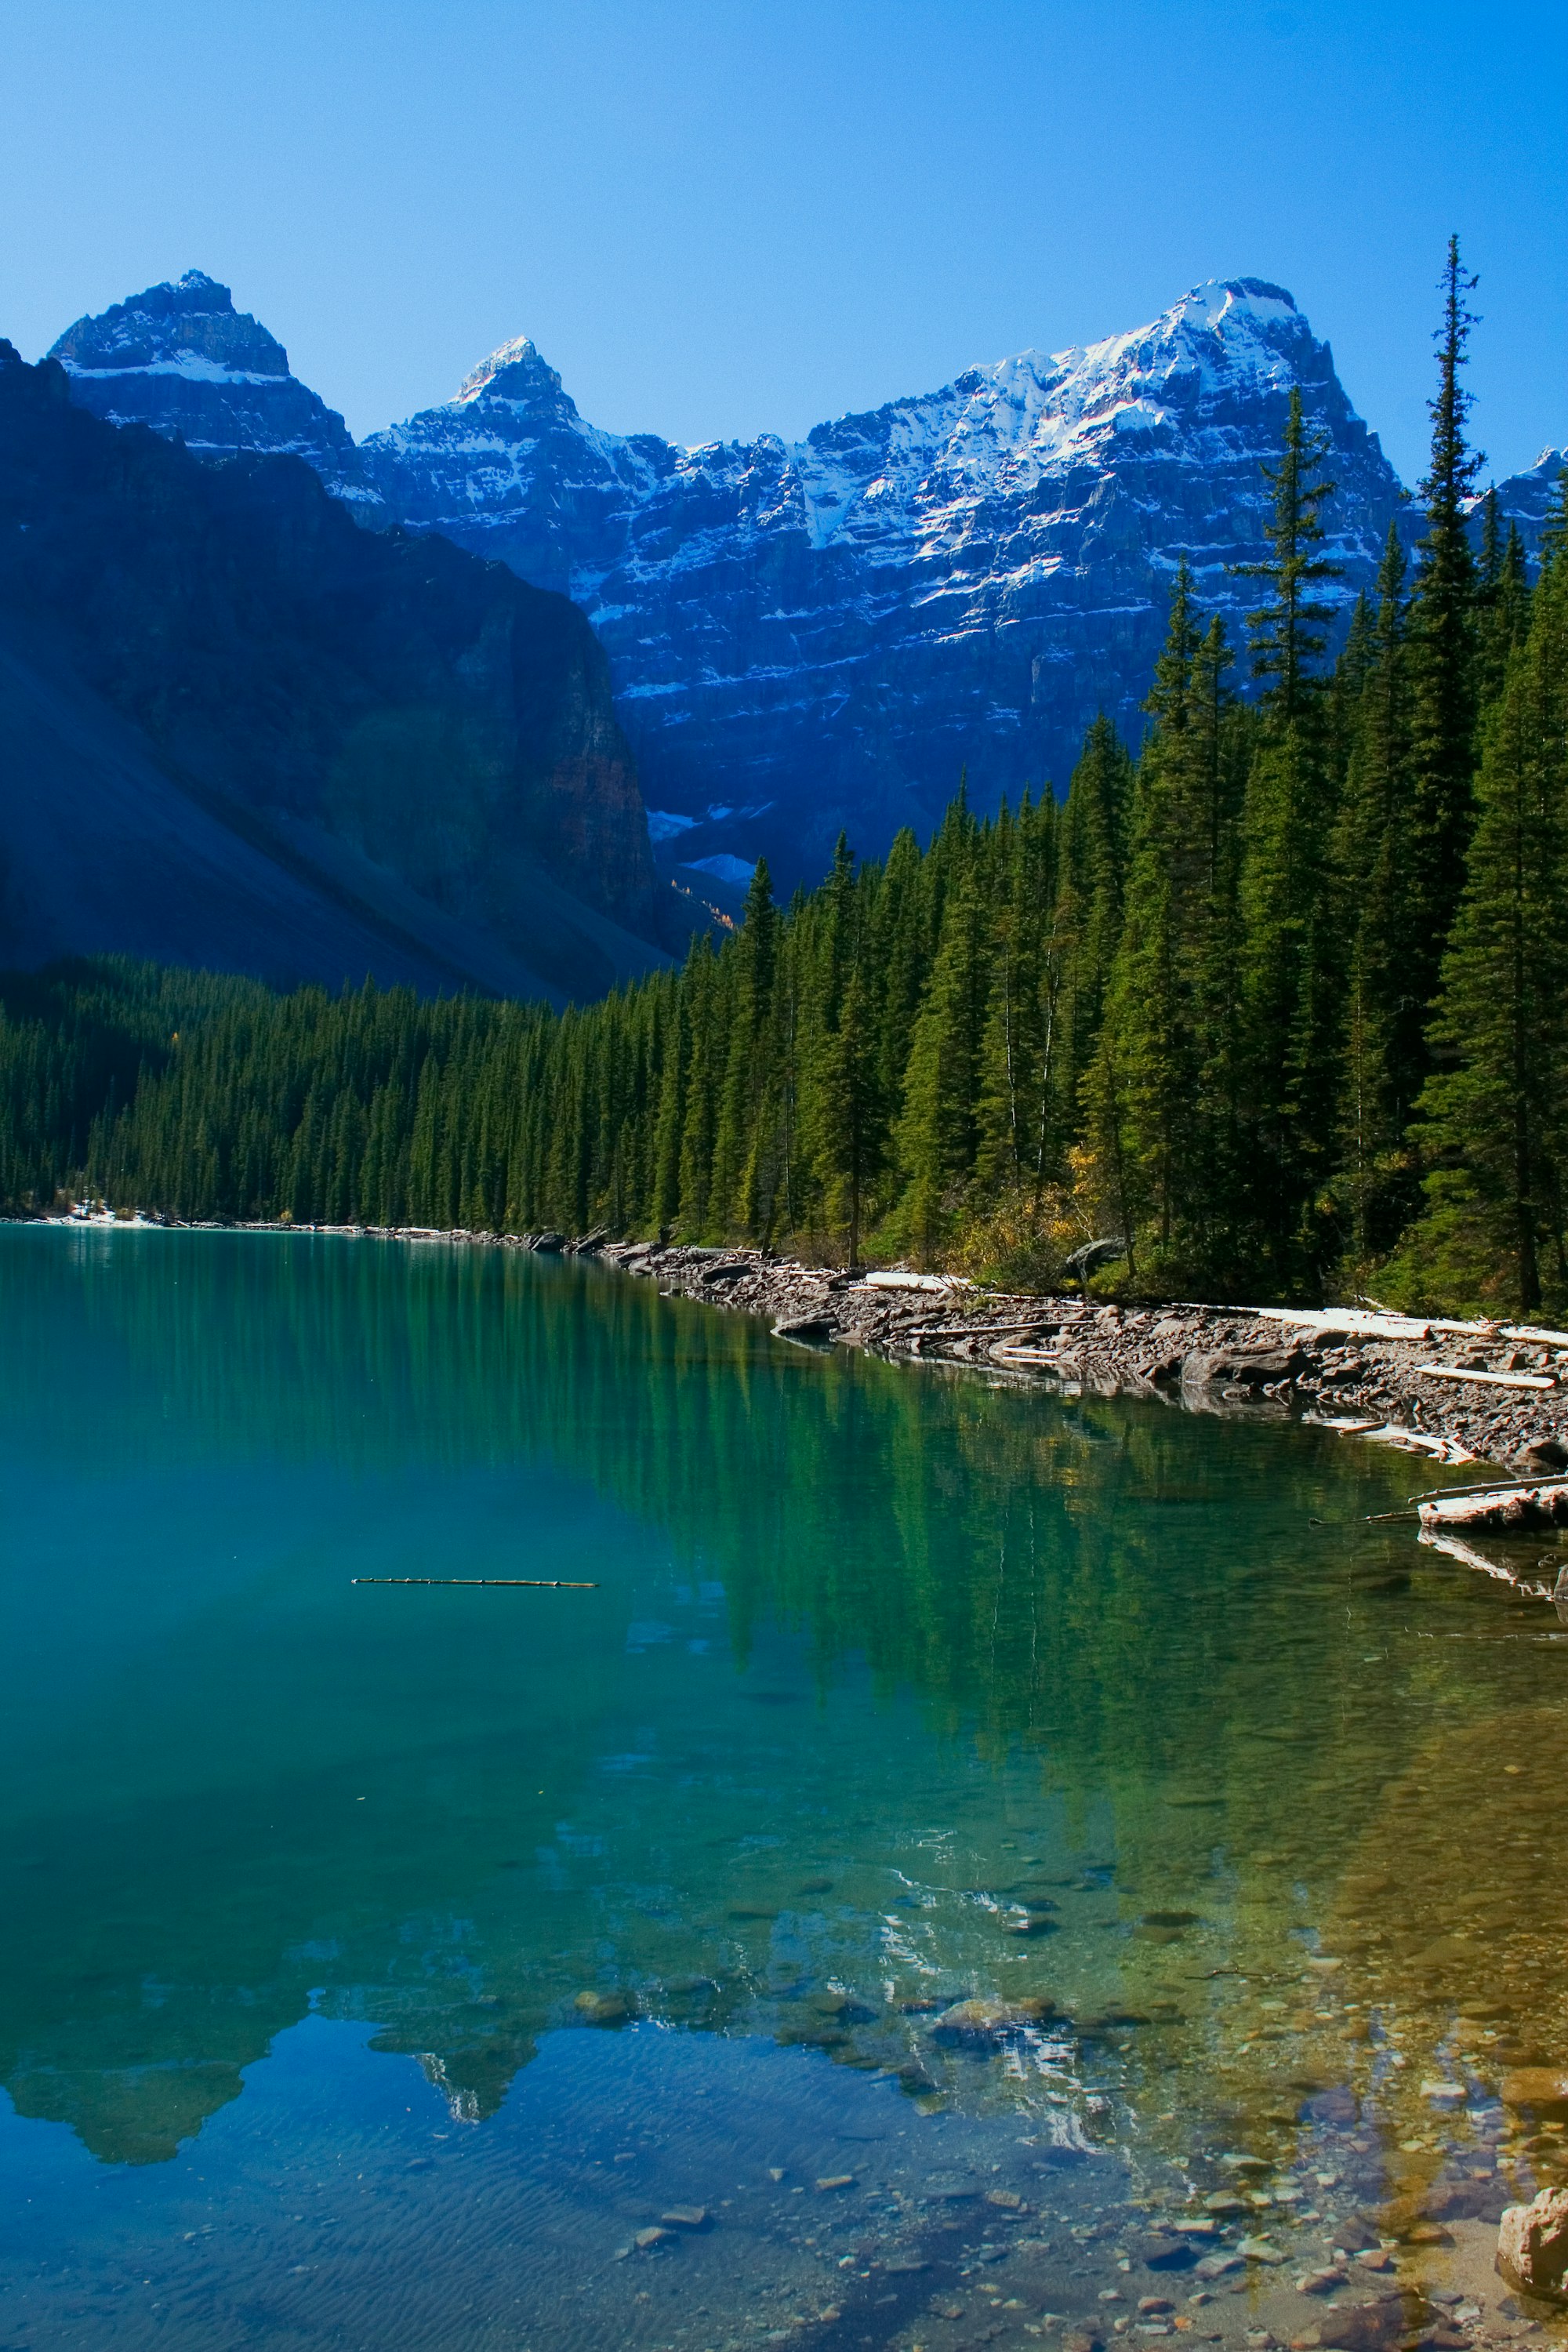 View of Moraine Lake, Banff National Park, Canada, with mountains in the background